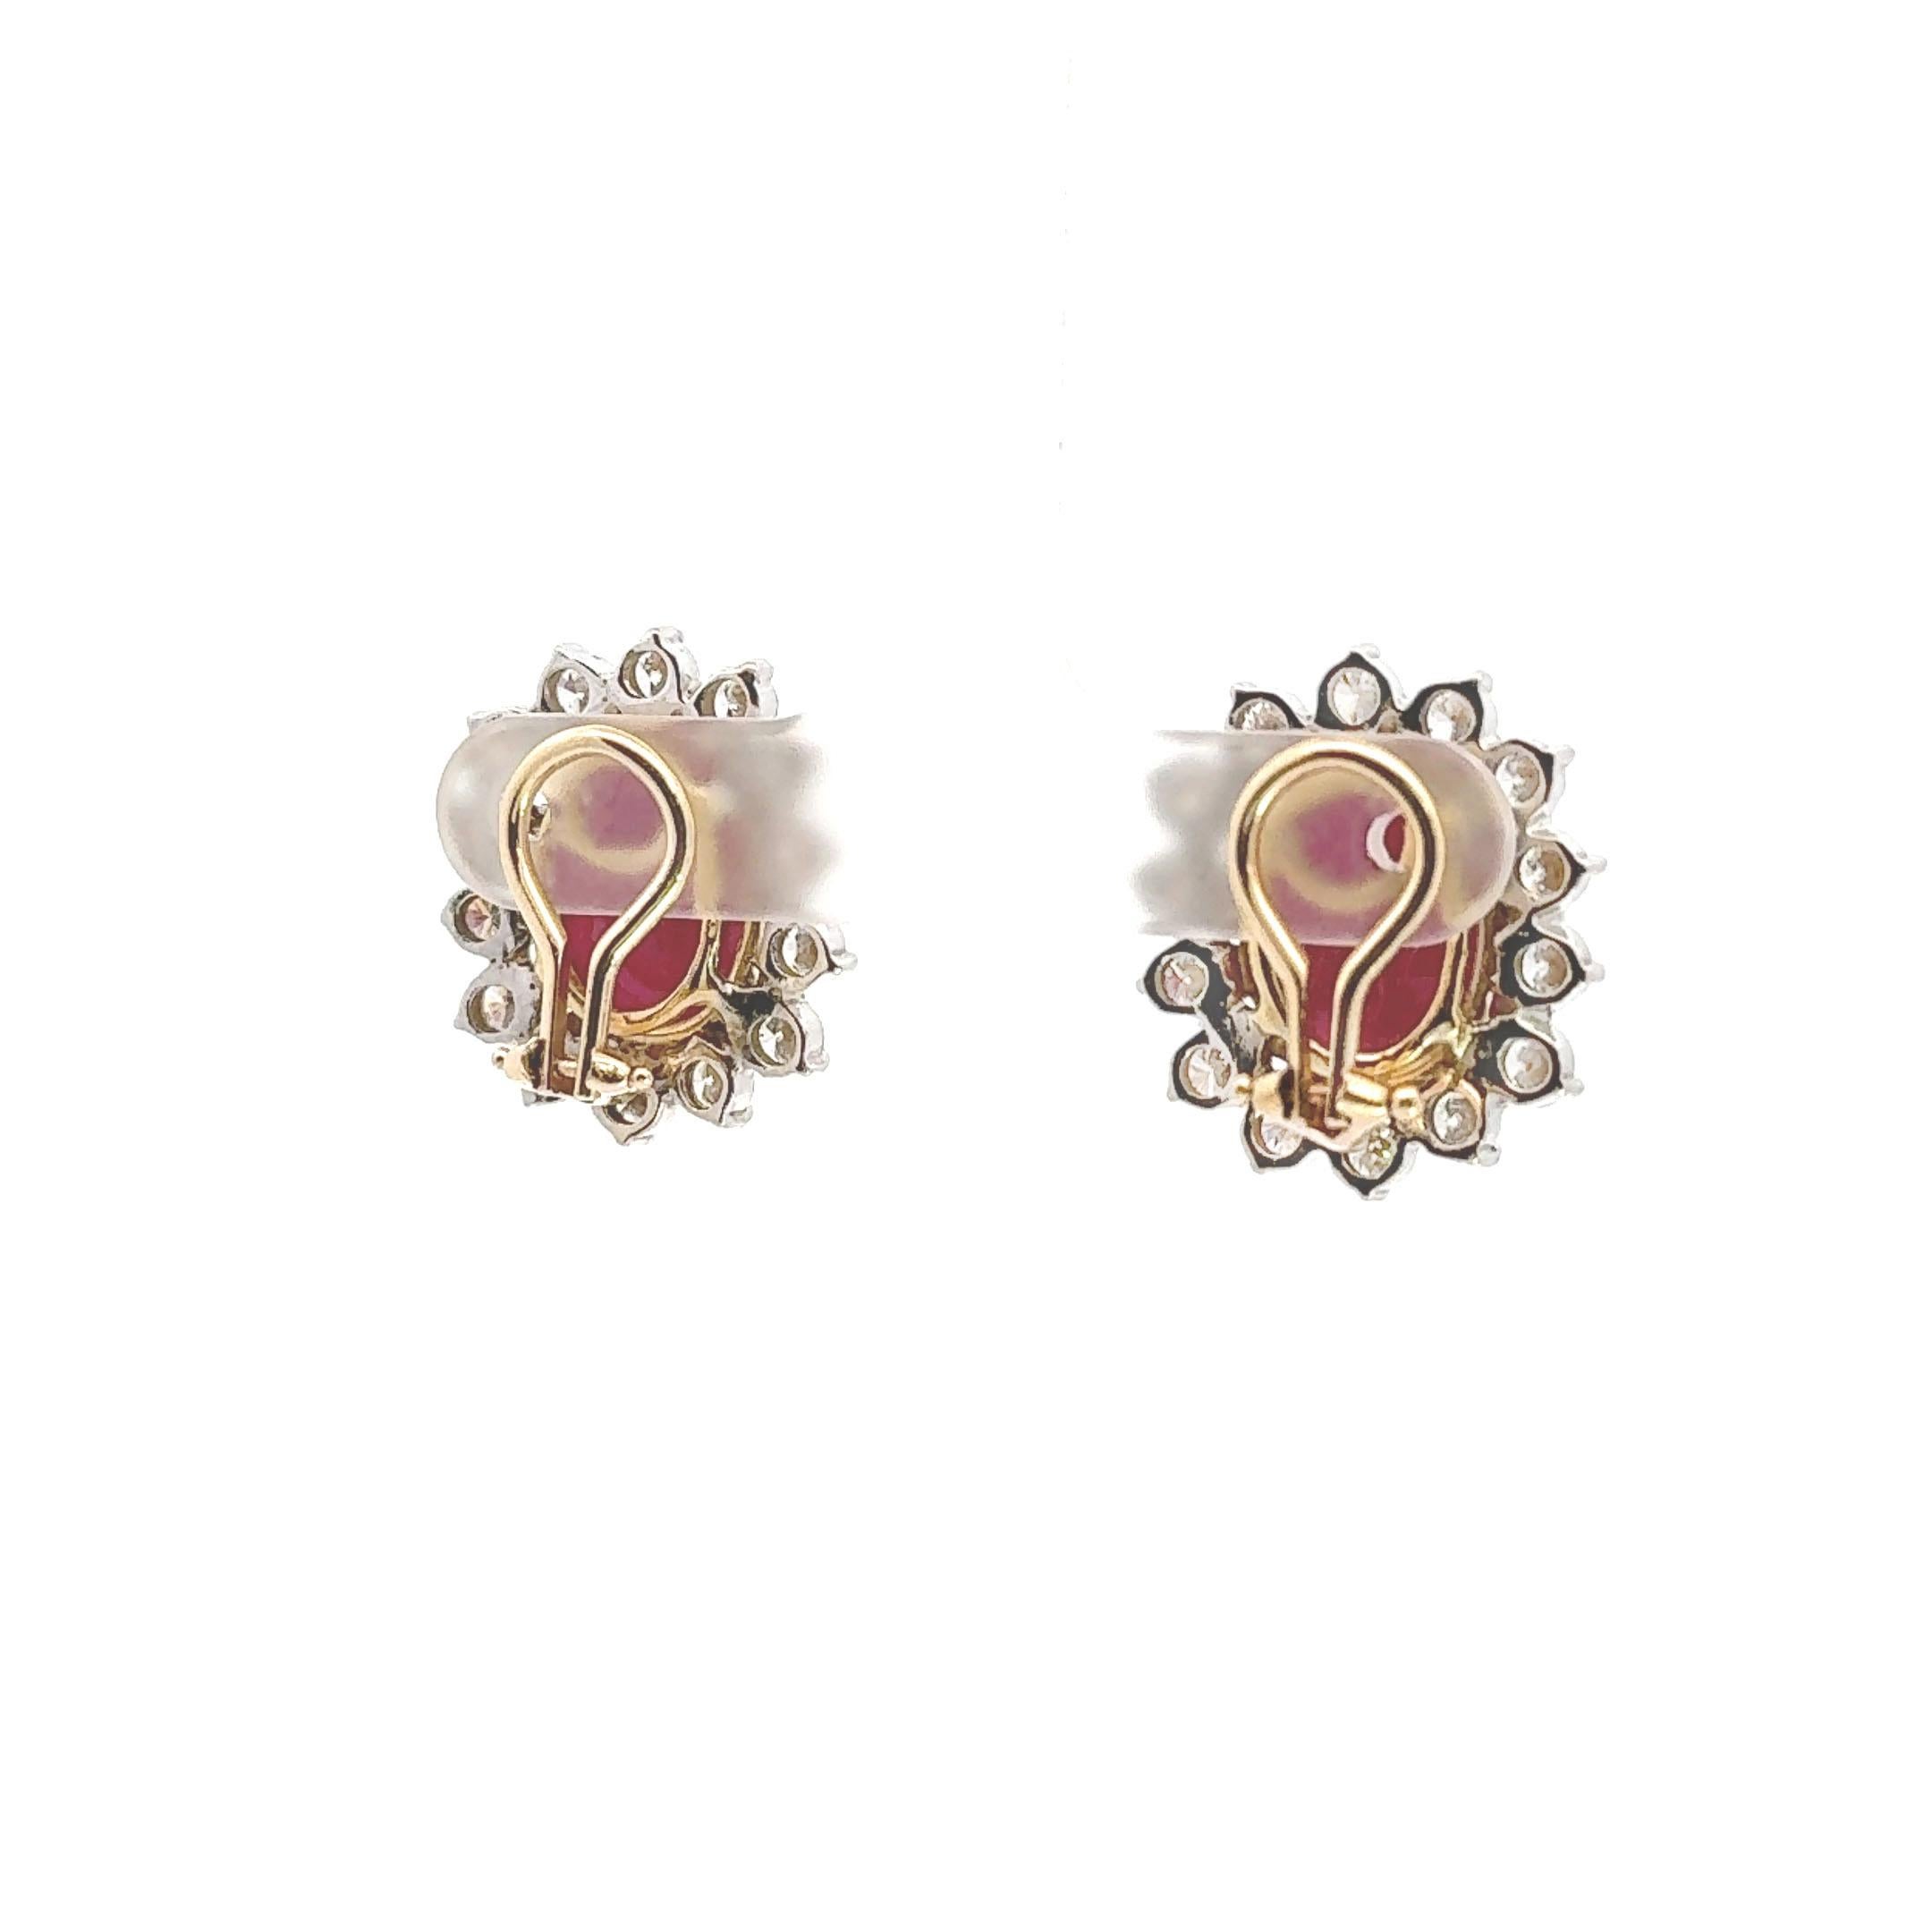 Cabochon Preowned 14K Yellow Gold Diamond and Ruby Earrings - Clip On For Sale